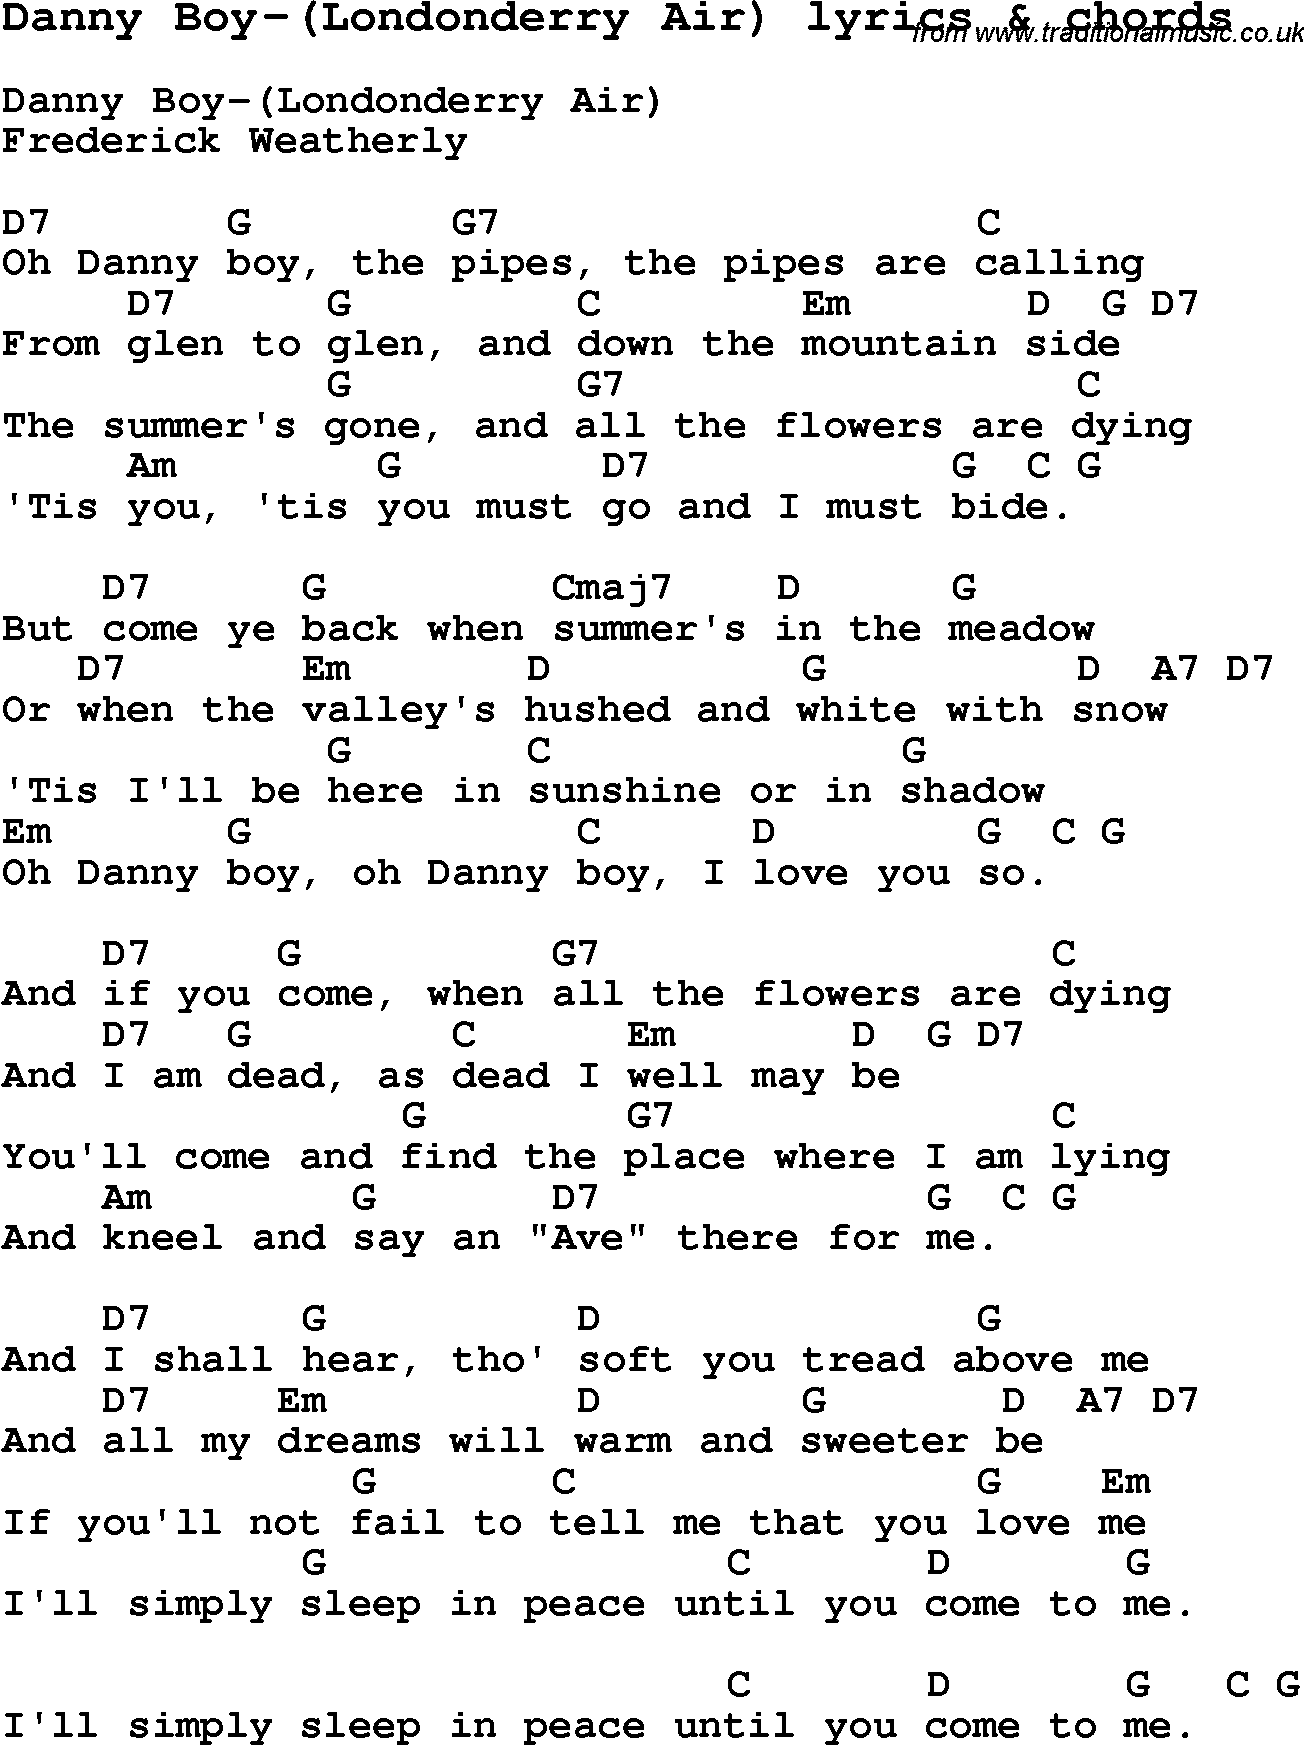 Love Song Lyrics for: Danny Boy-(Londonderry Air) with chords for Ukulele, Guitar Banjo etc.